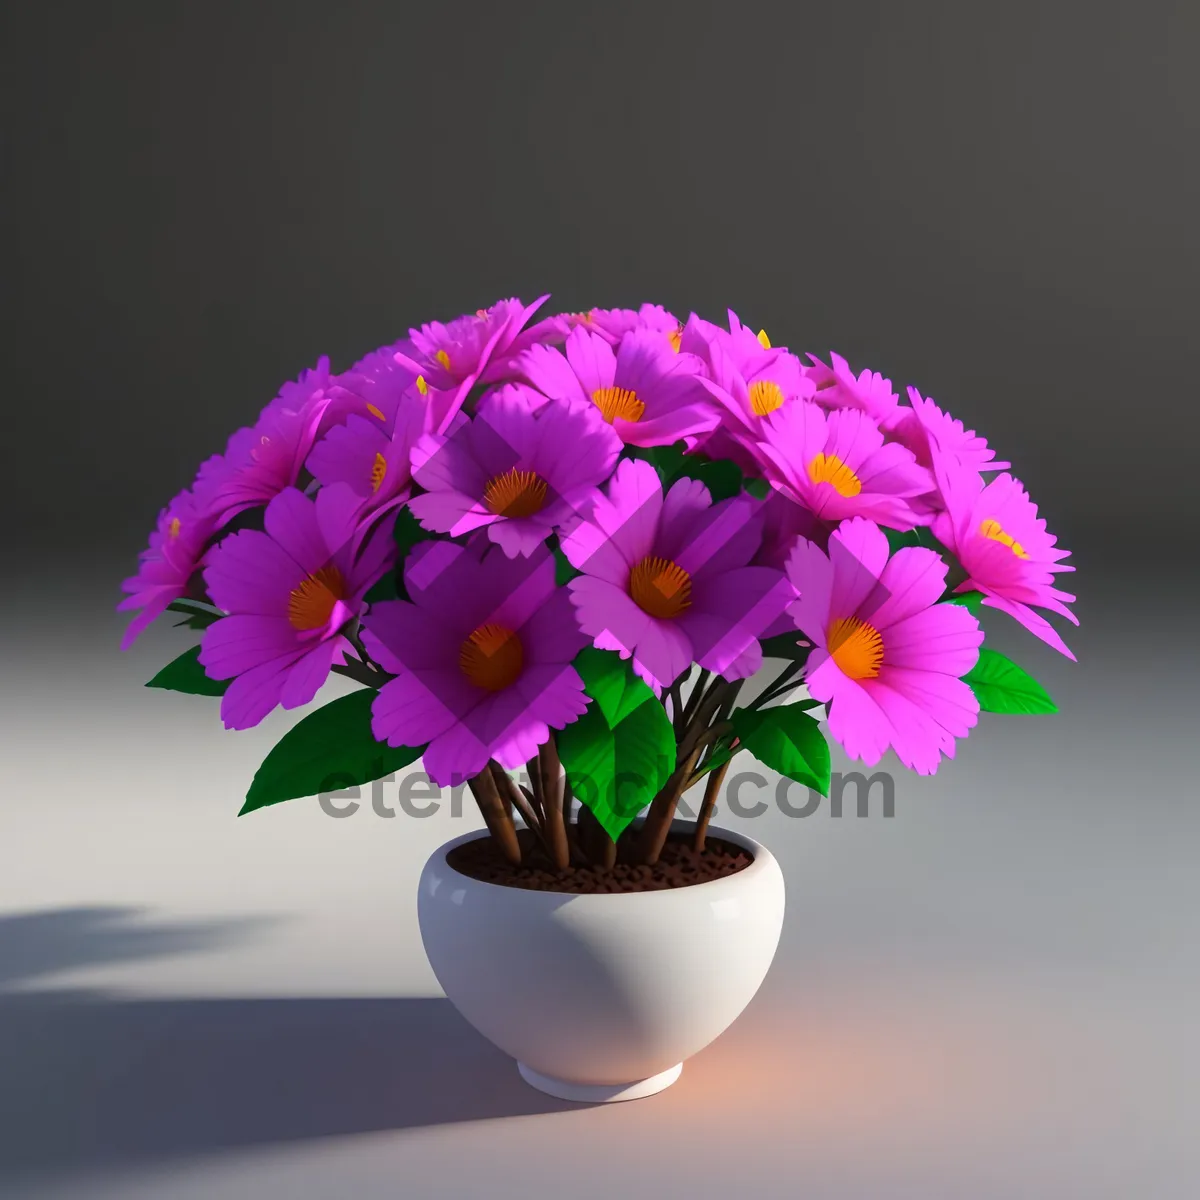 Picture of Colorful Summer Blossom Bouquet in Pink